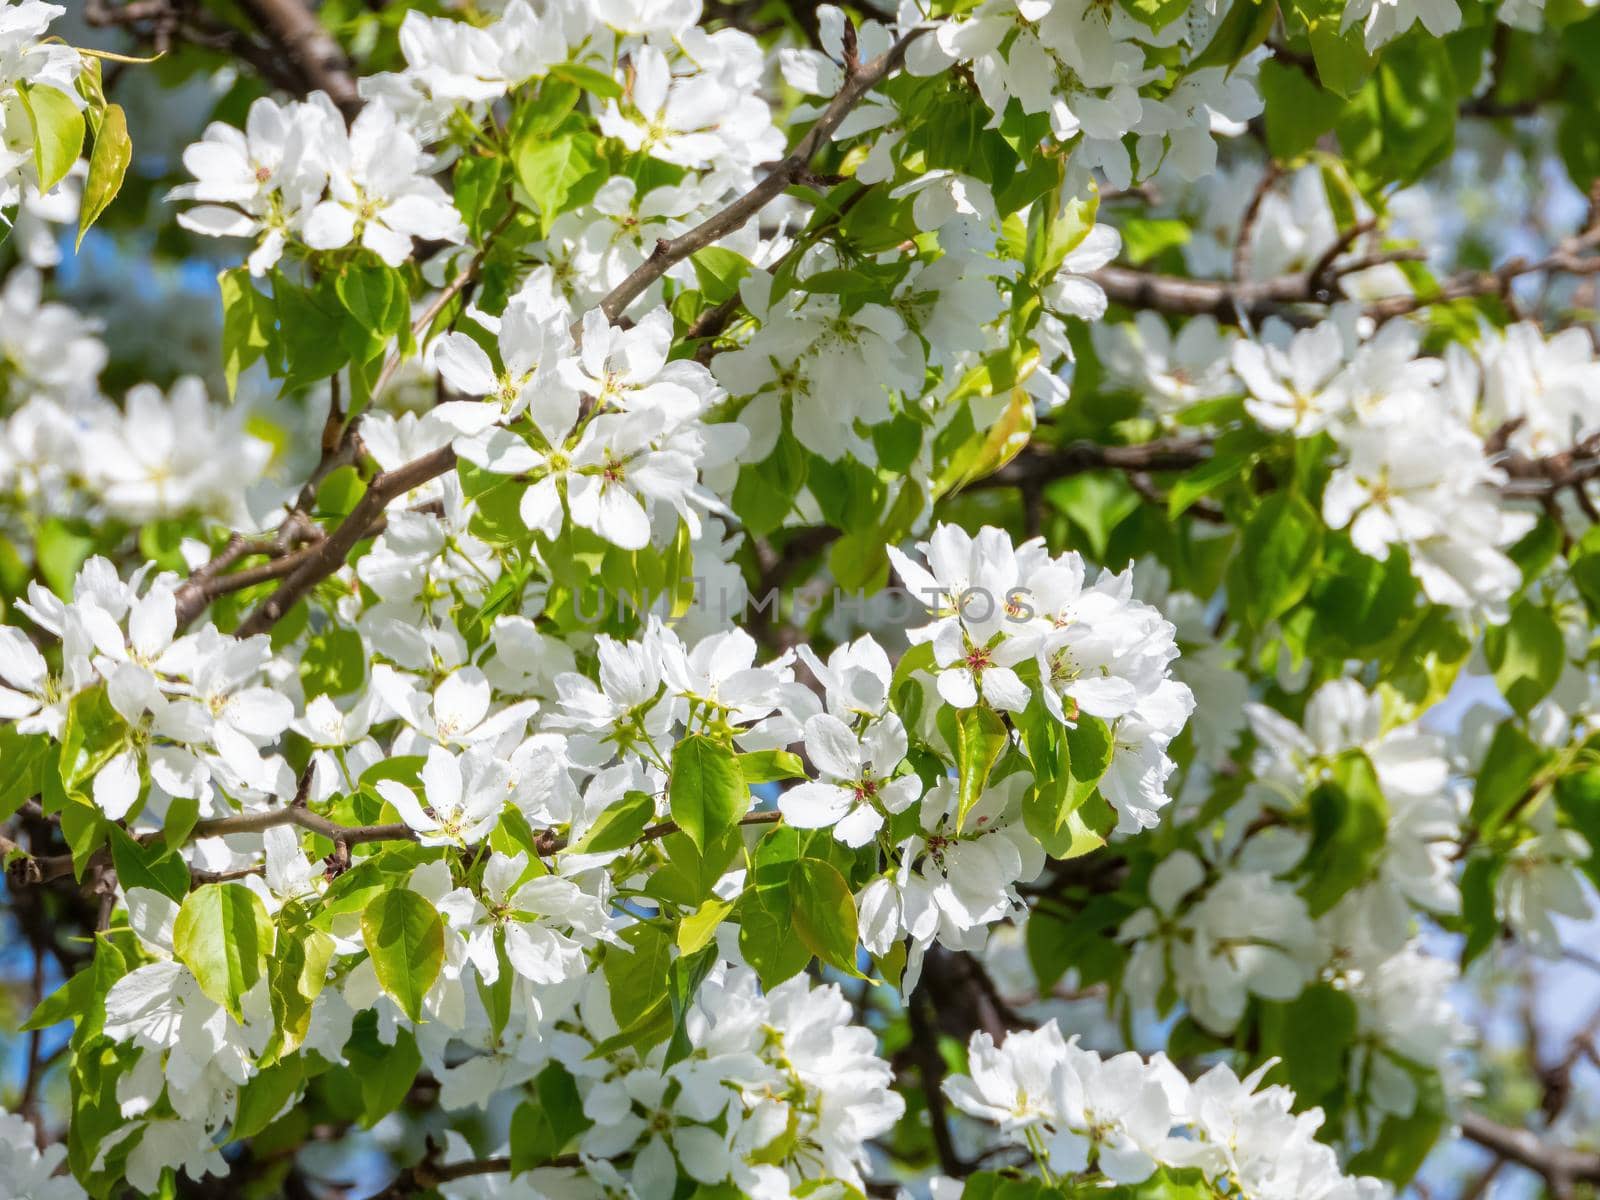 Blooming apple tree with white flowers, closeup view